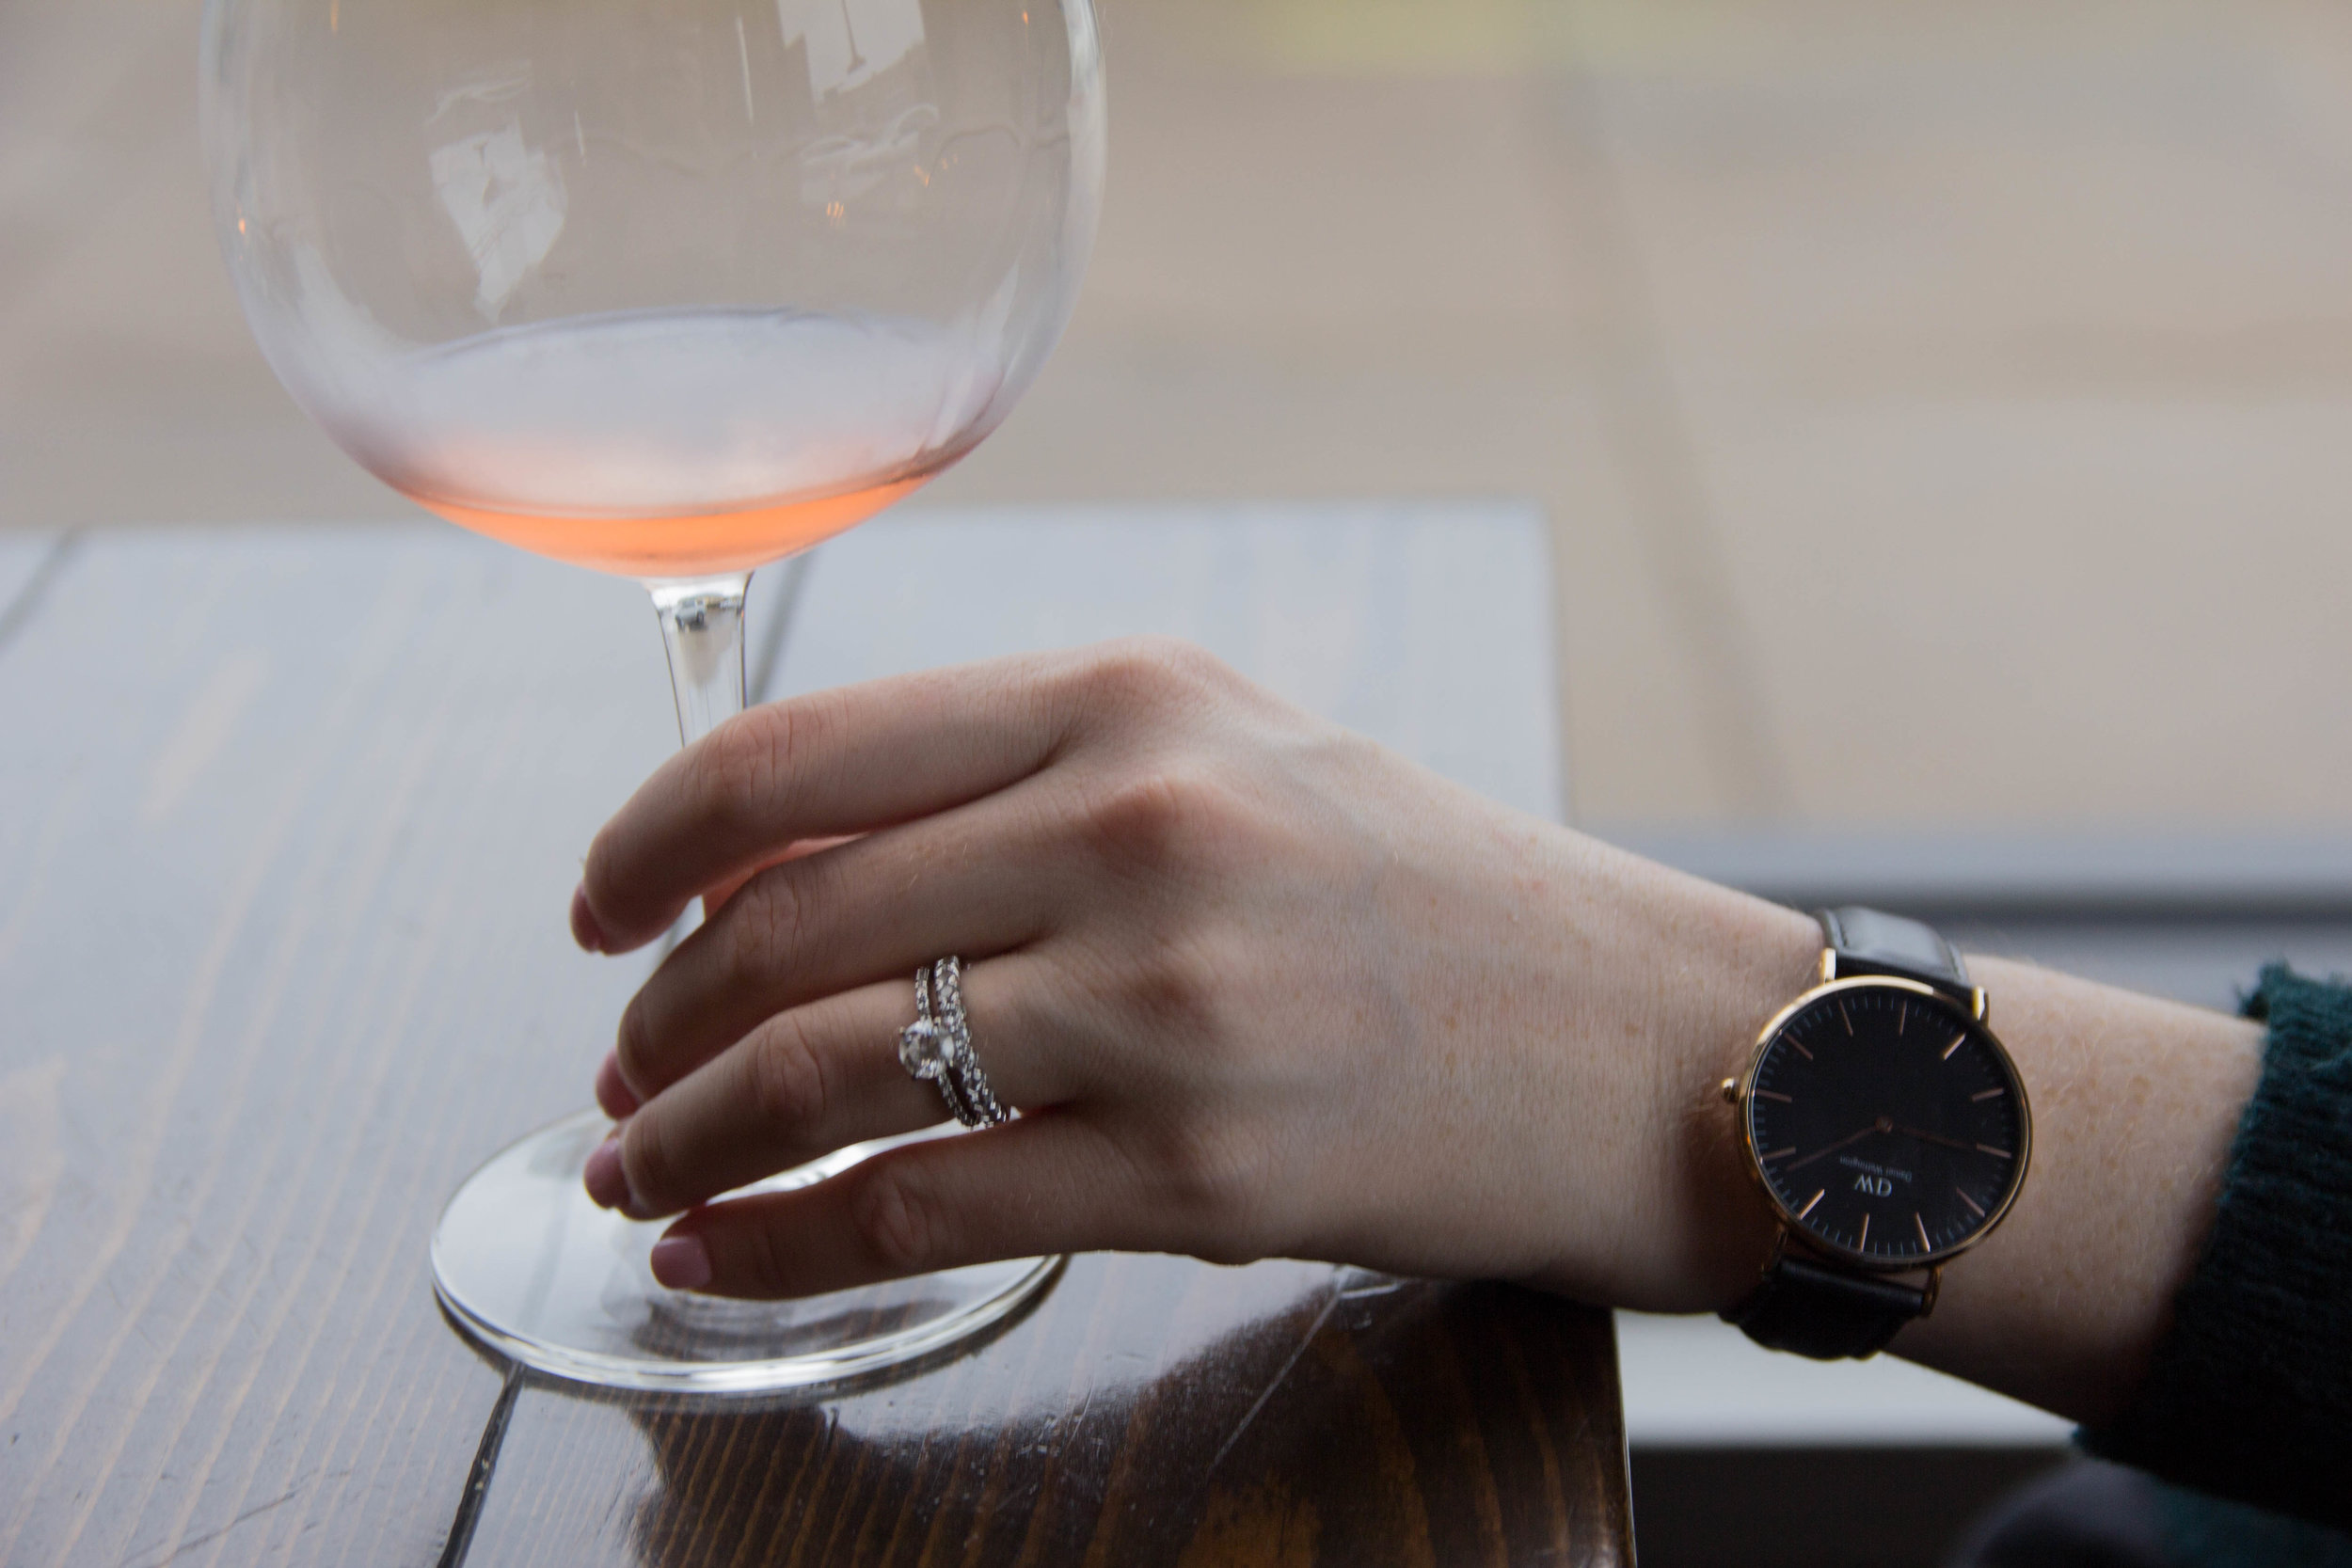 jewelers mutual, fuller's jewelry, daniel wellington classic black watch, where to get your engagement ring in dallas, where to get your wedding rings in dallas, wine poste, bar anatomie, neighborhood cellar, bishop arts district, rose all day, how …